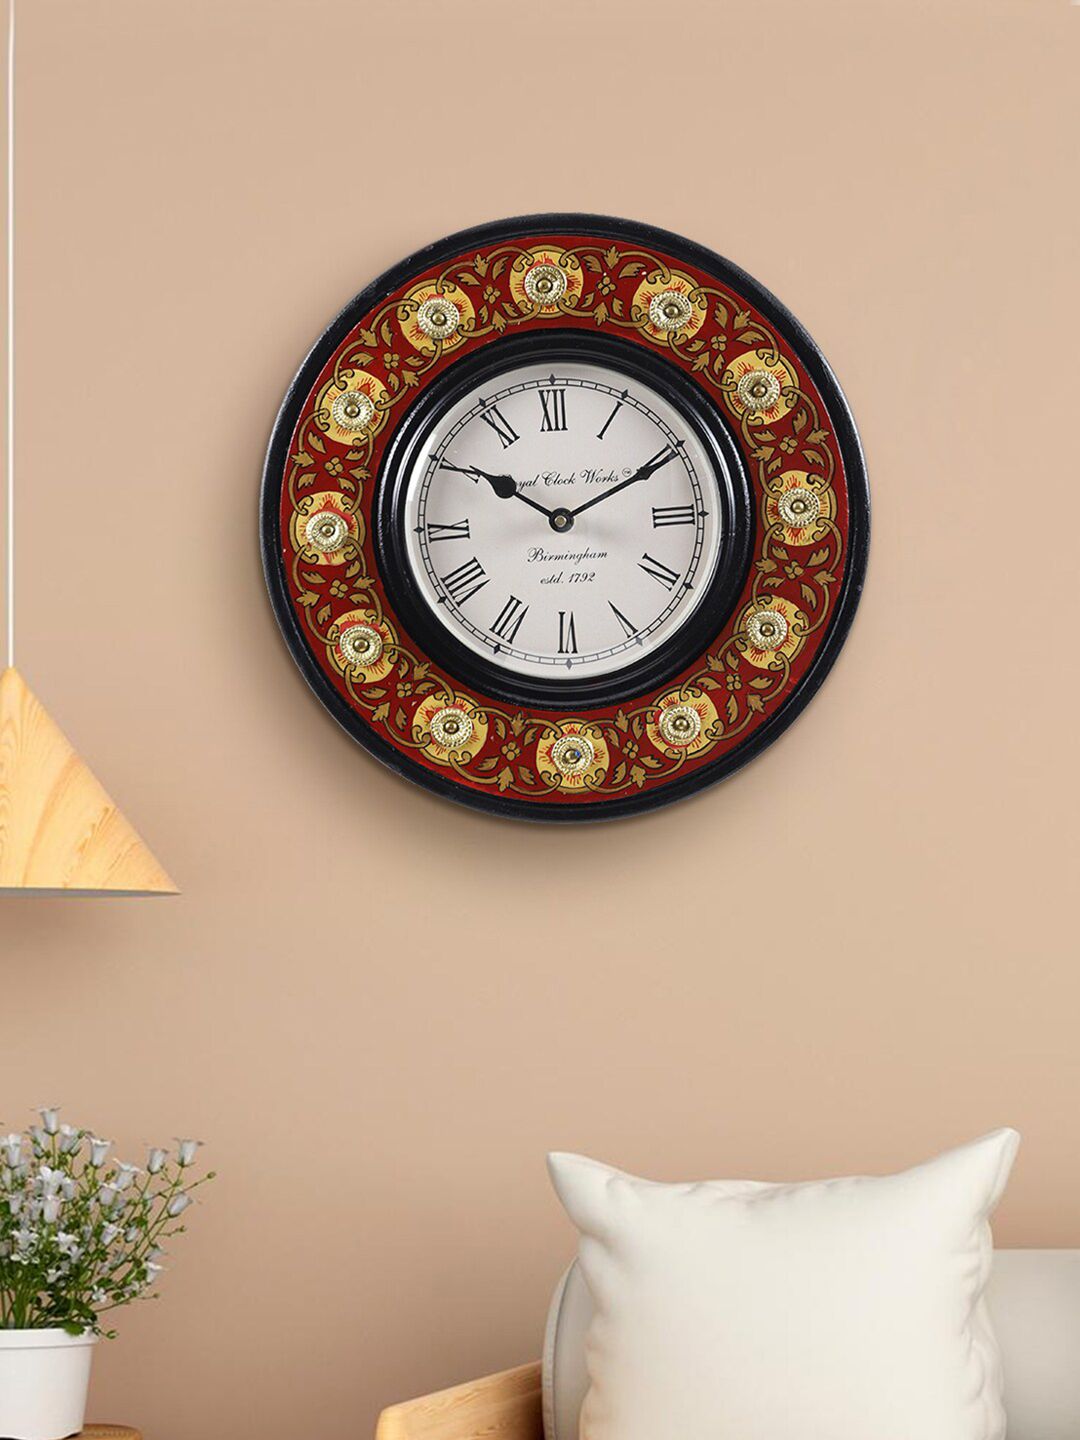 Aapno Rajasthan Red & Yellow Printed Contemporary Handcrafted Analogue Wall Clock Price in India